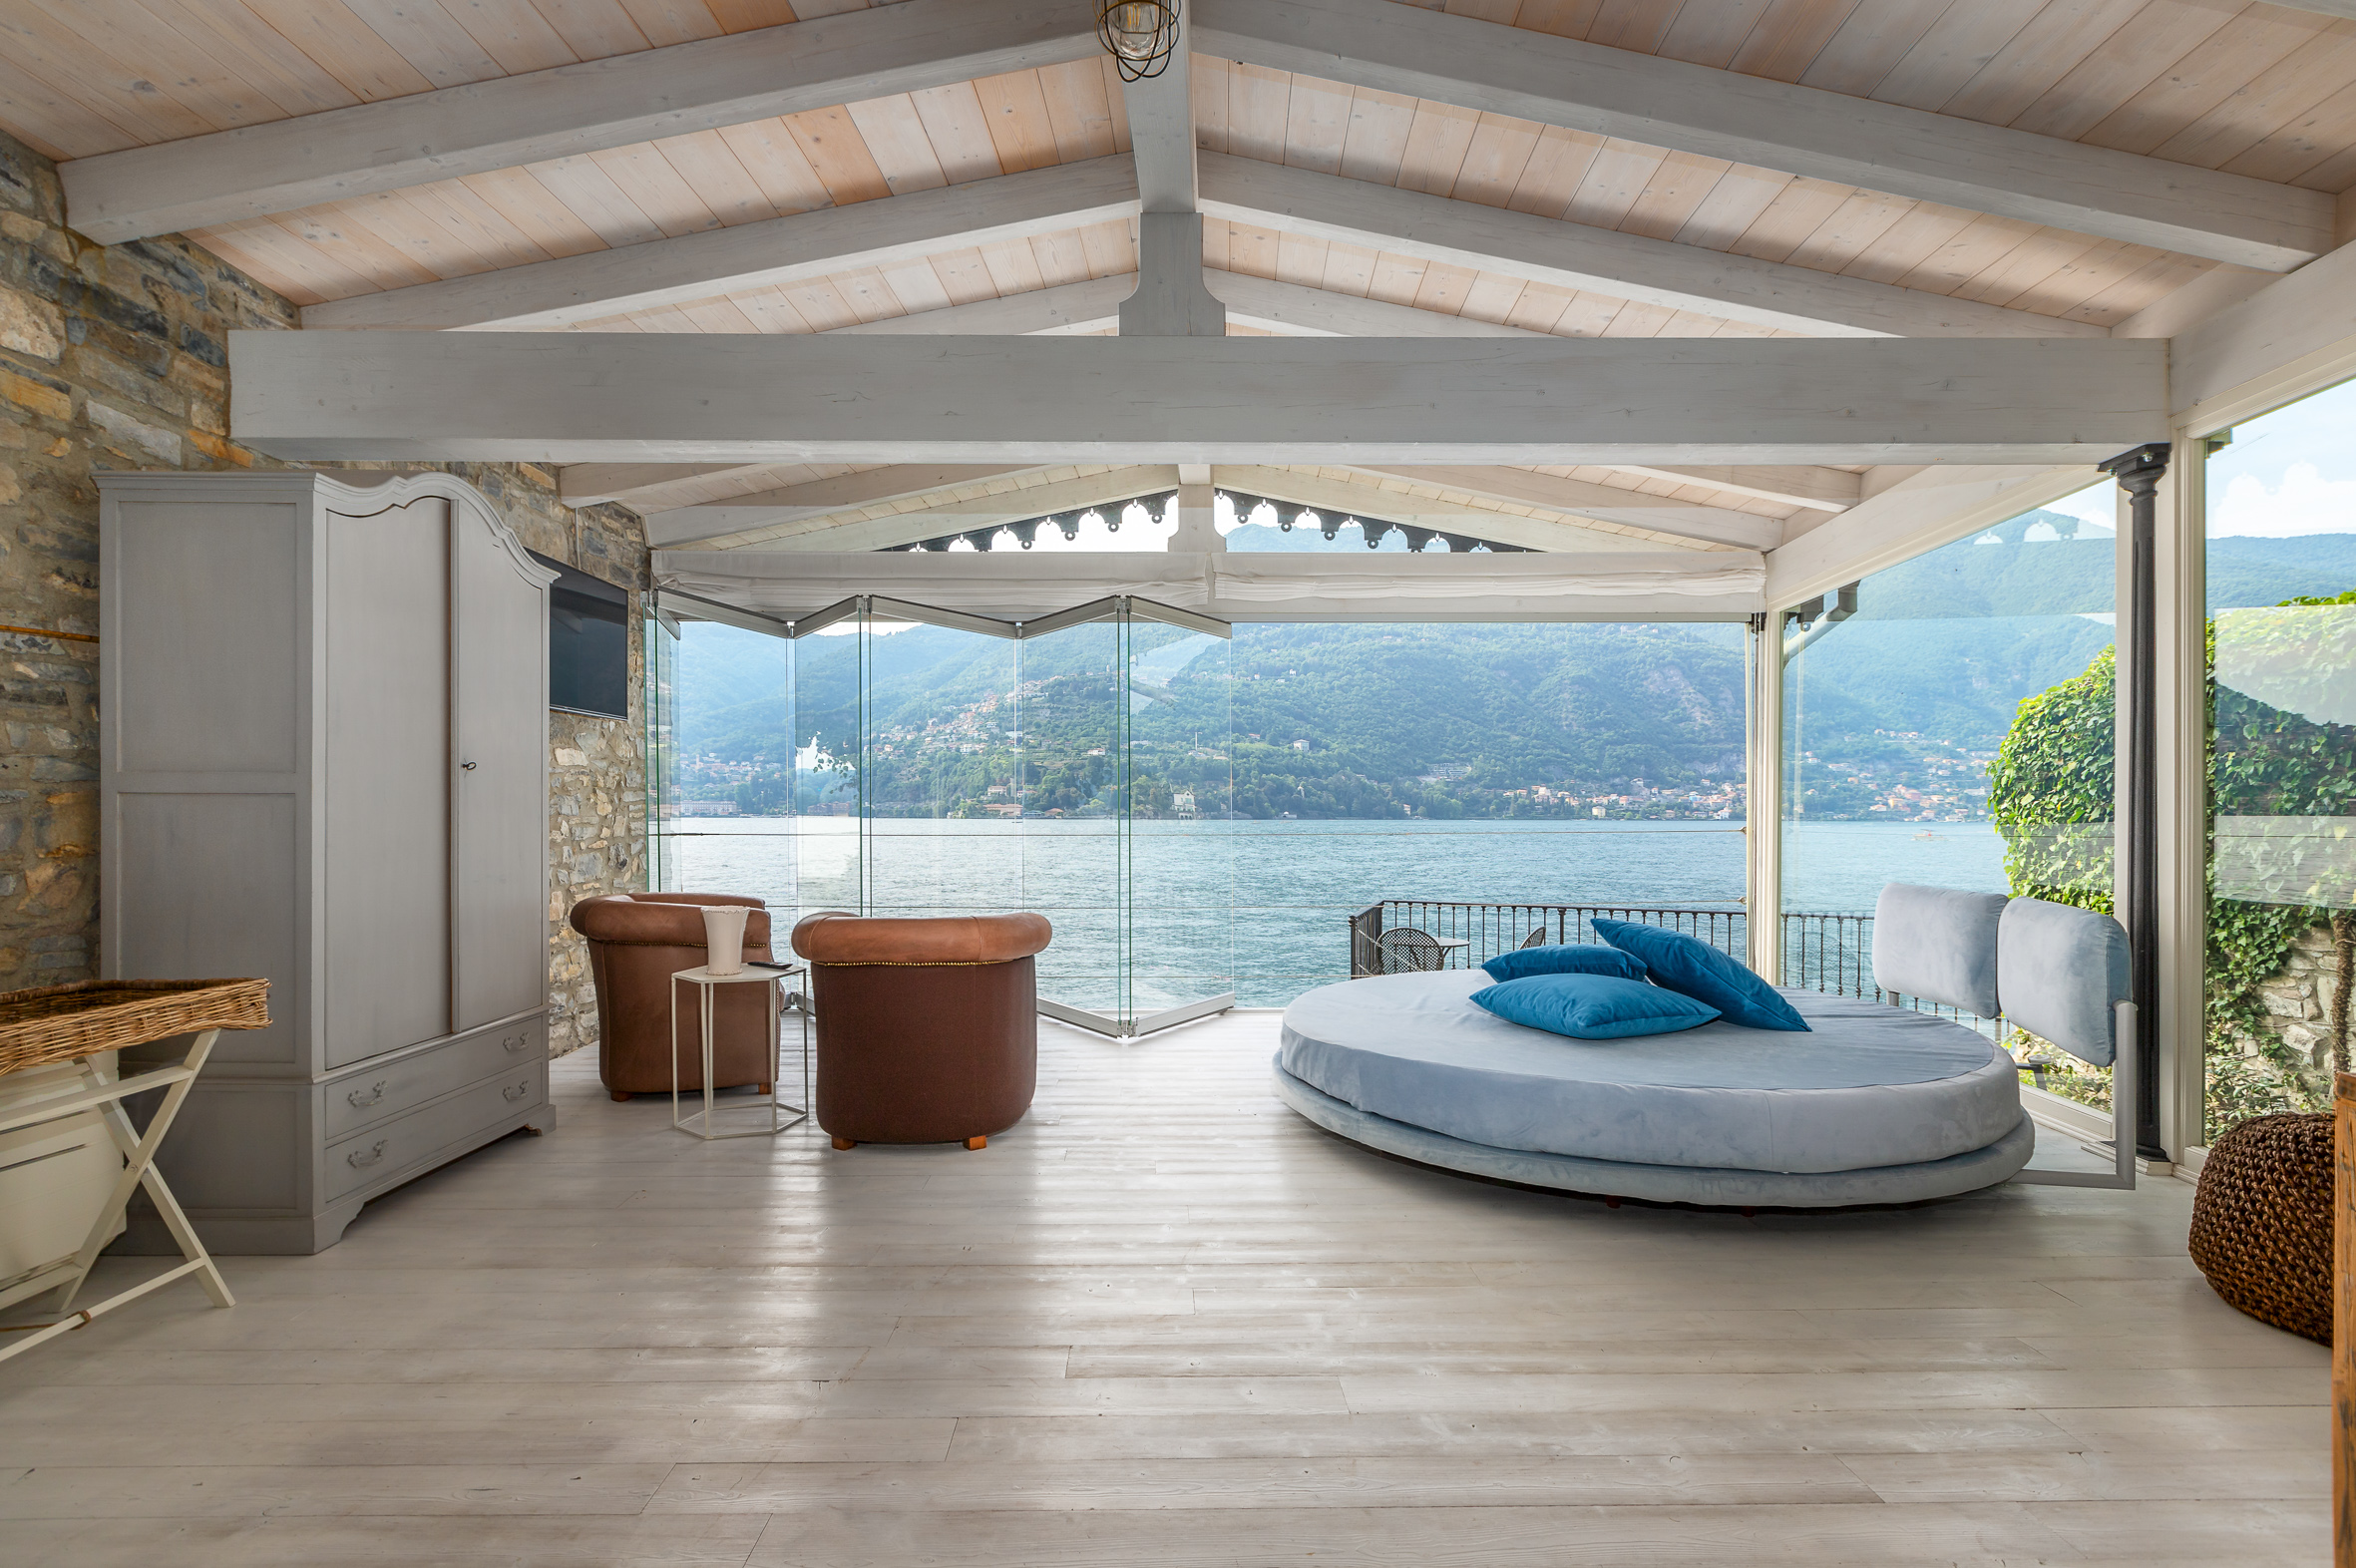 A room with a bed, dresser and a big glass wall with a nice view of the lake.